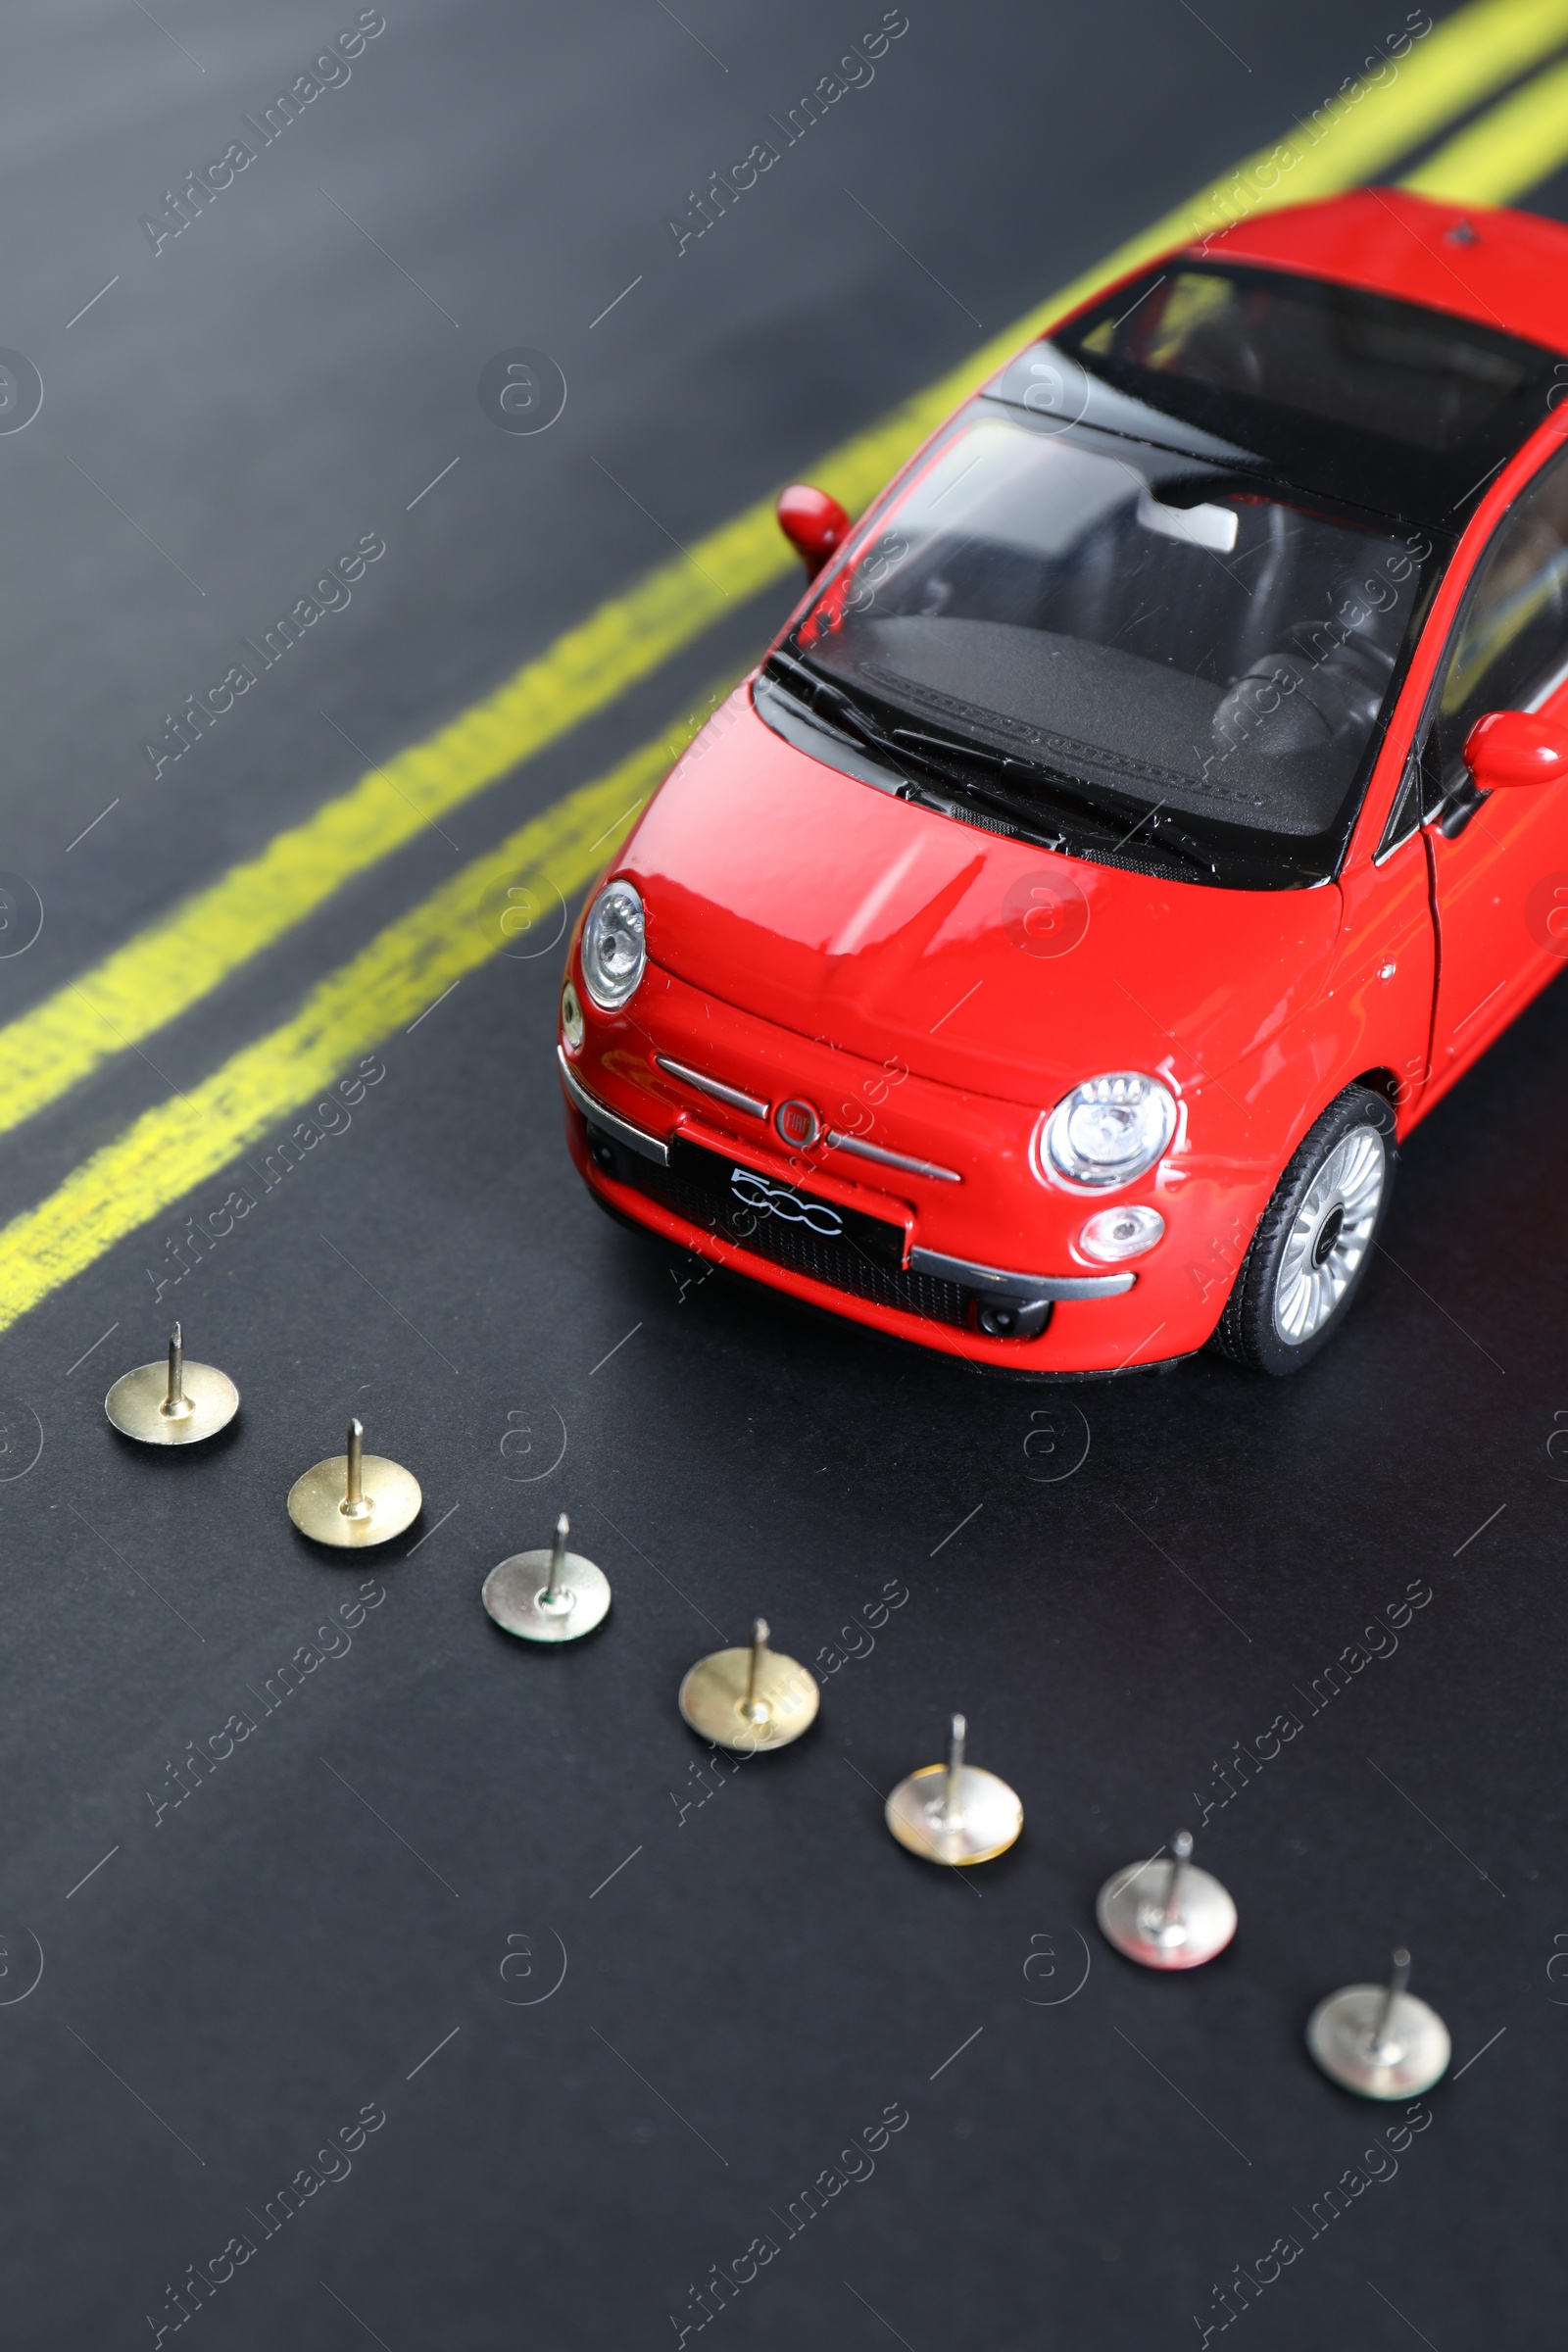 Photo of Pins as barrier blocking way for red toy car. Development through obstacles overcoming